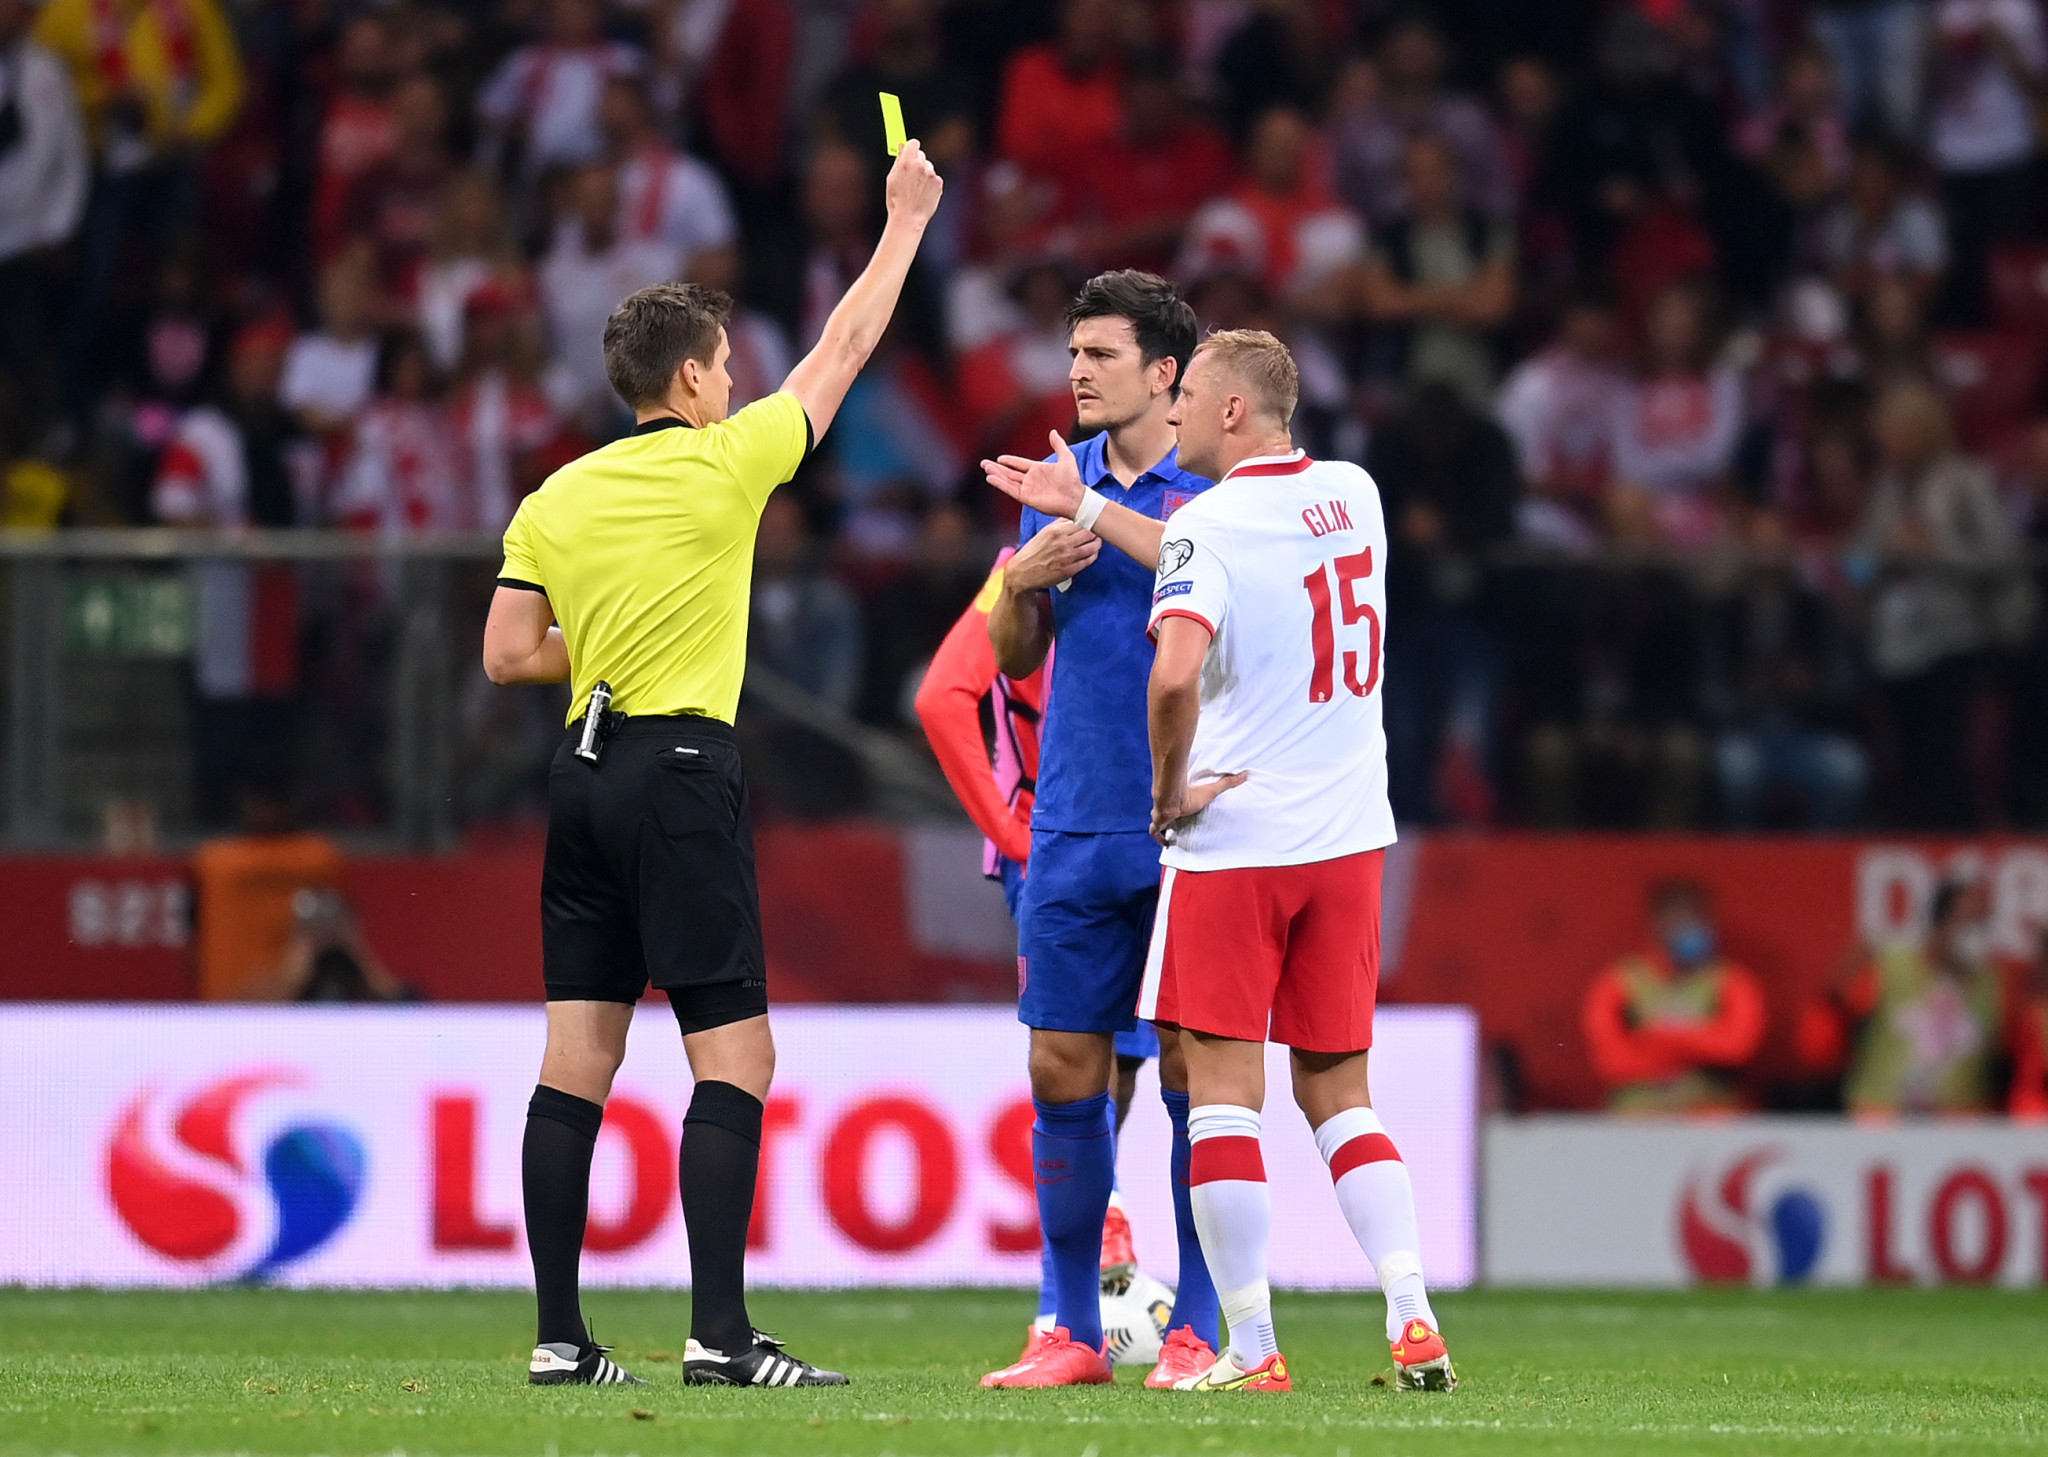 Kamil Glik, white, and Harry Maguire, blue, were both bookde after the incident at half-time, but FIFA took no further action ©Getty Images